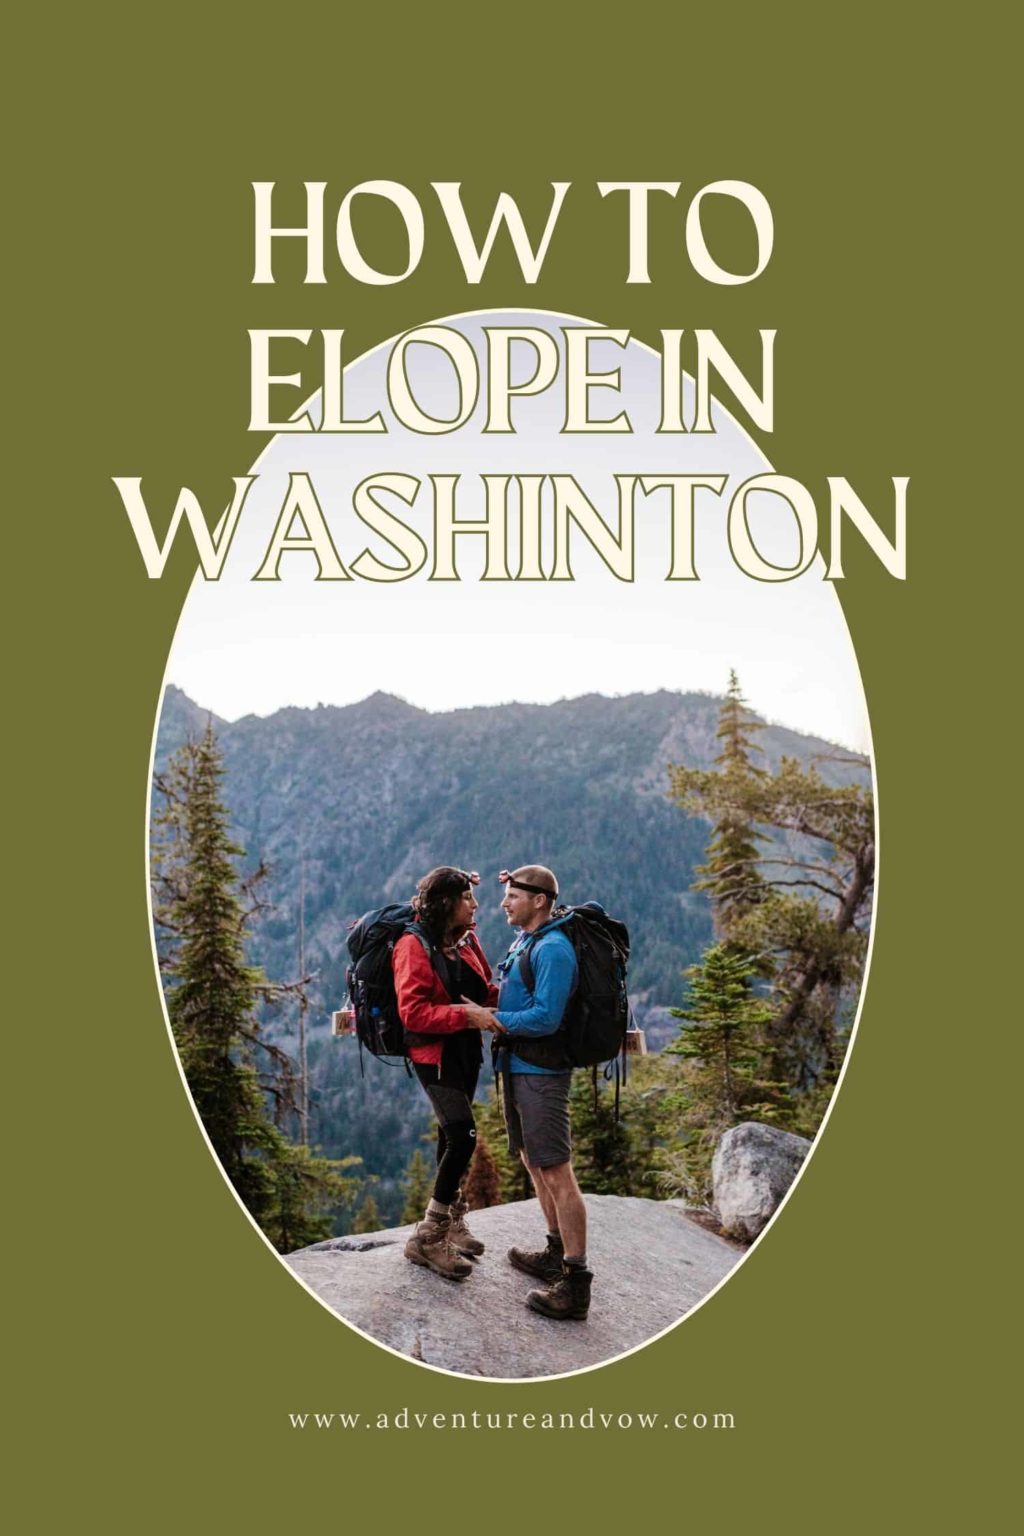 How to Elope in Washington guide promo image. 